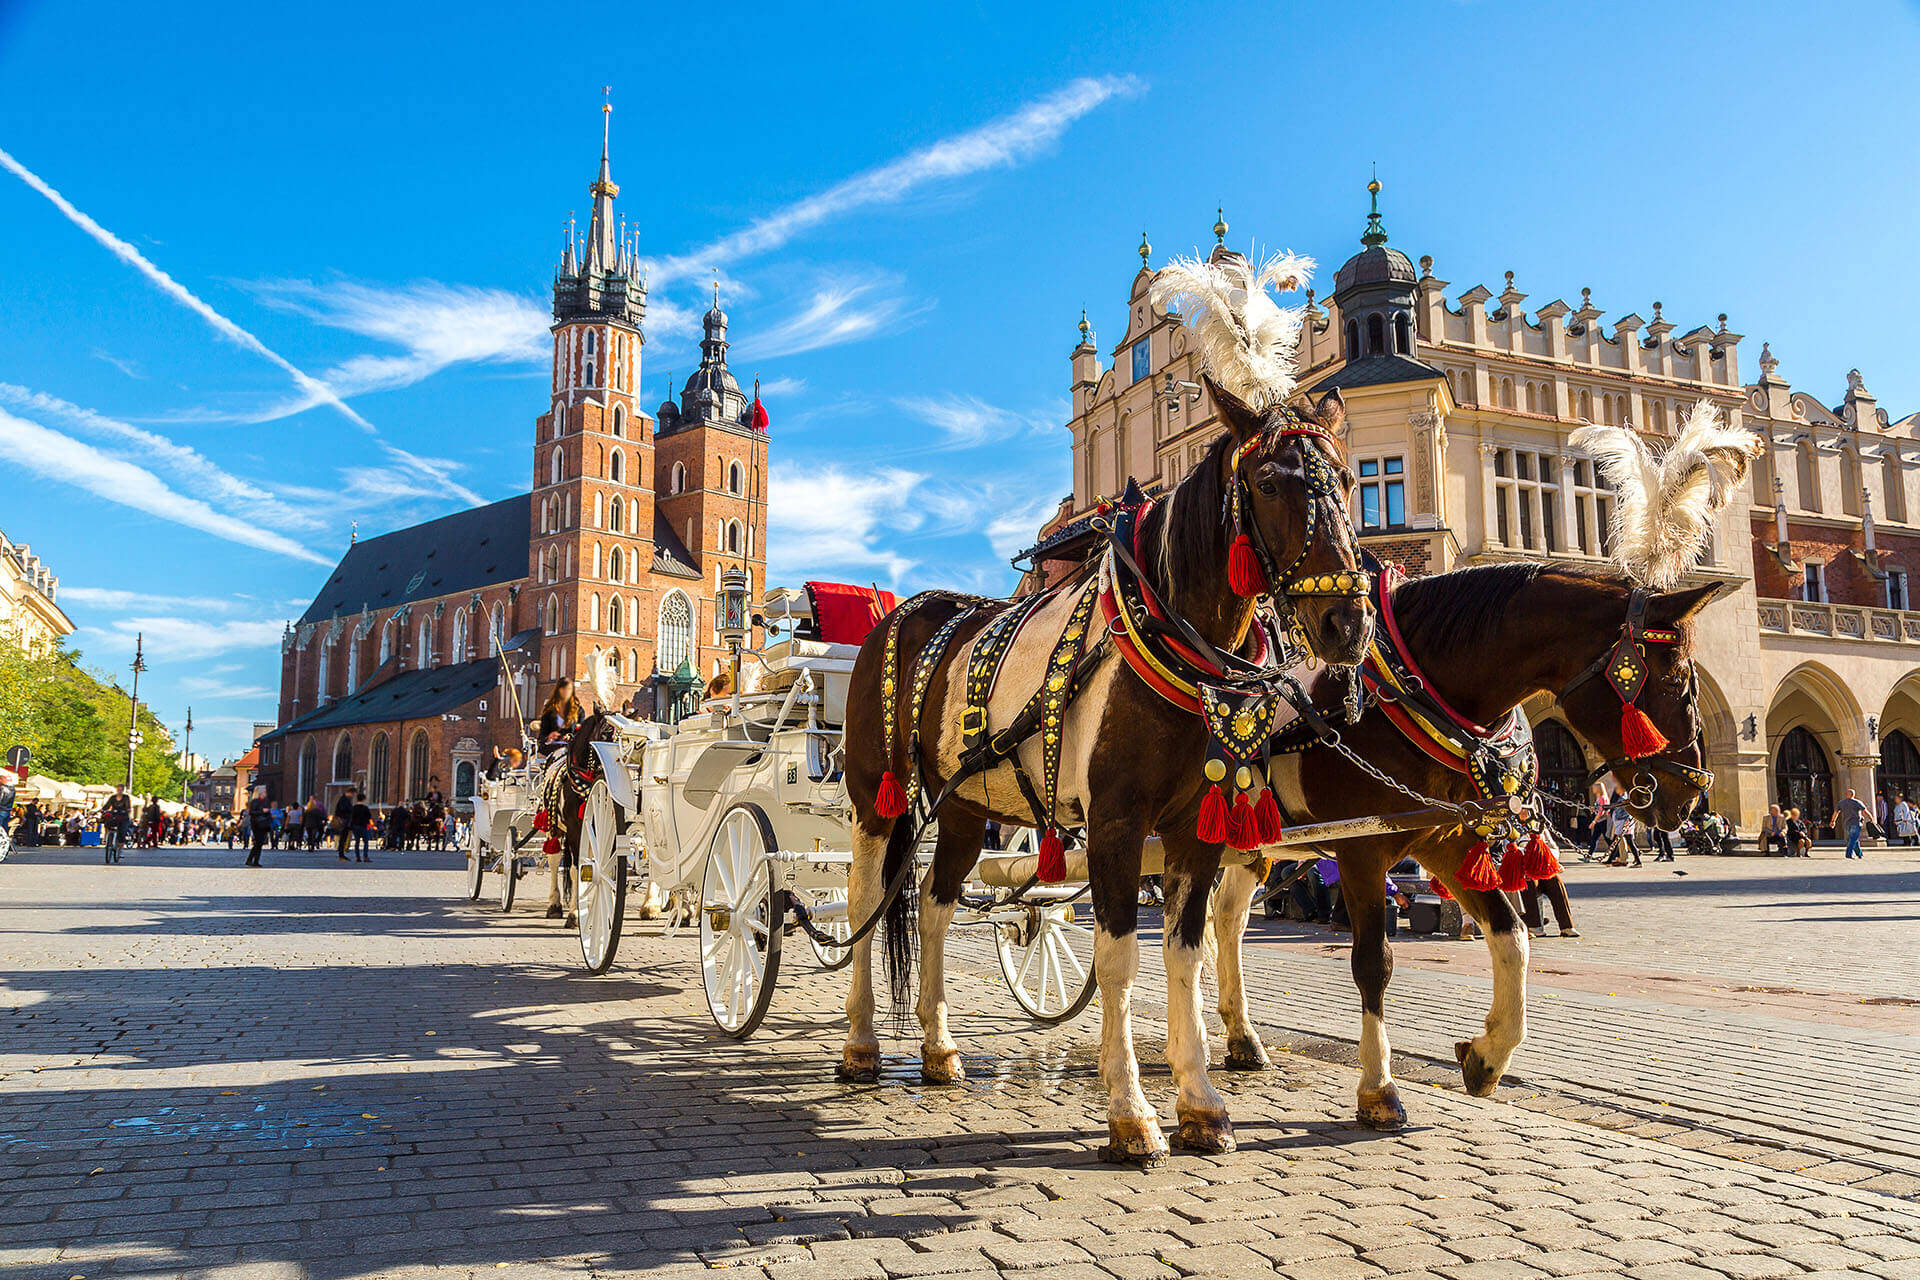 Poland: Immigration Process Changes for Residence and Work Permits